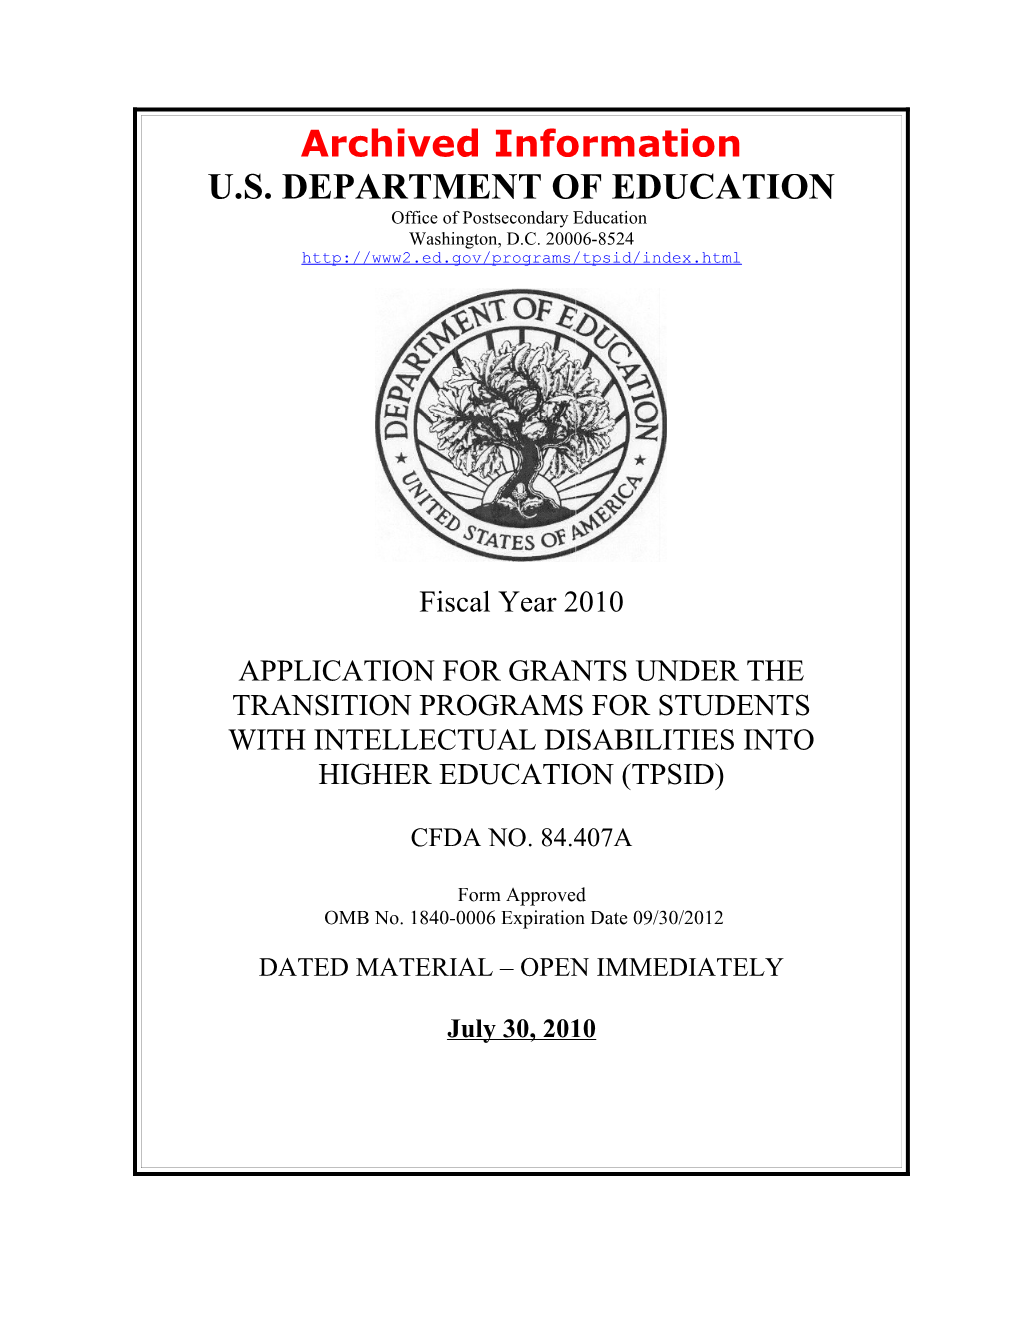 Archived FY 2010 Grant Application - Transition Programs for Students with Intellectual